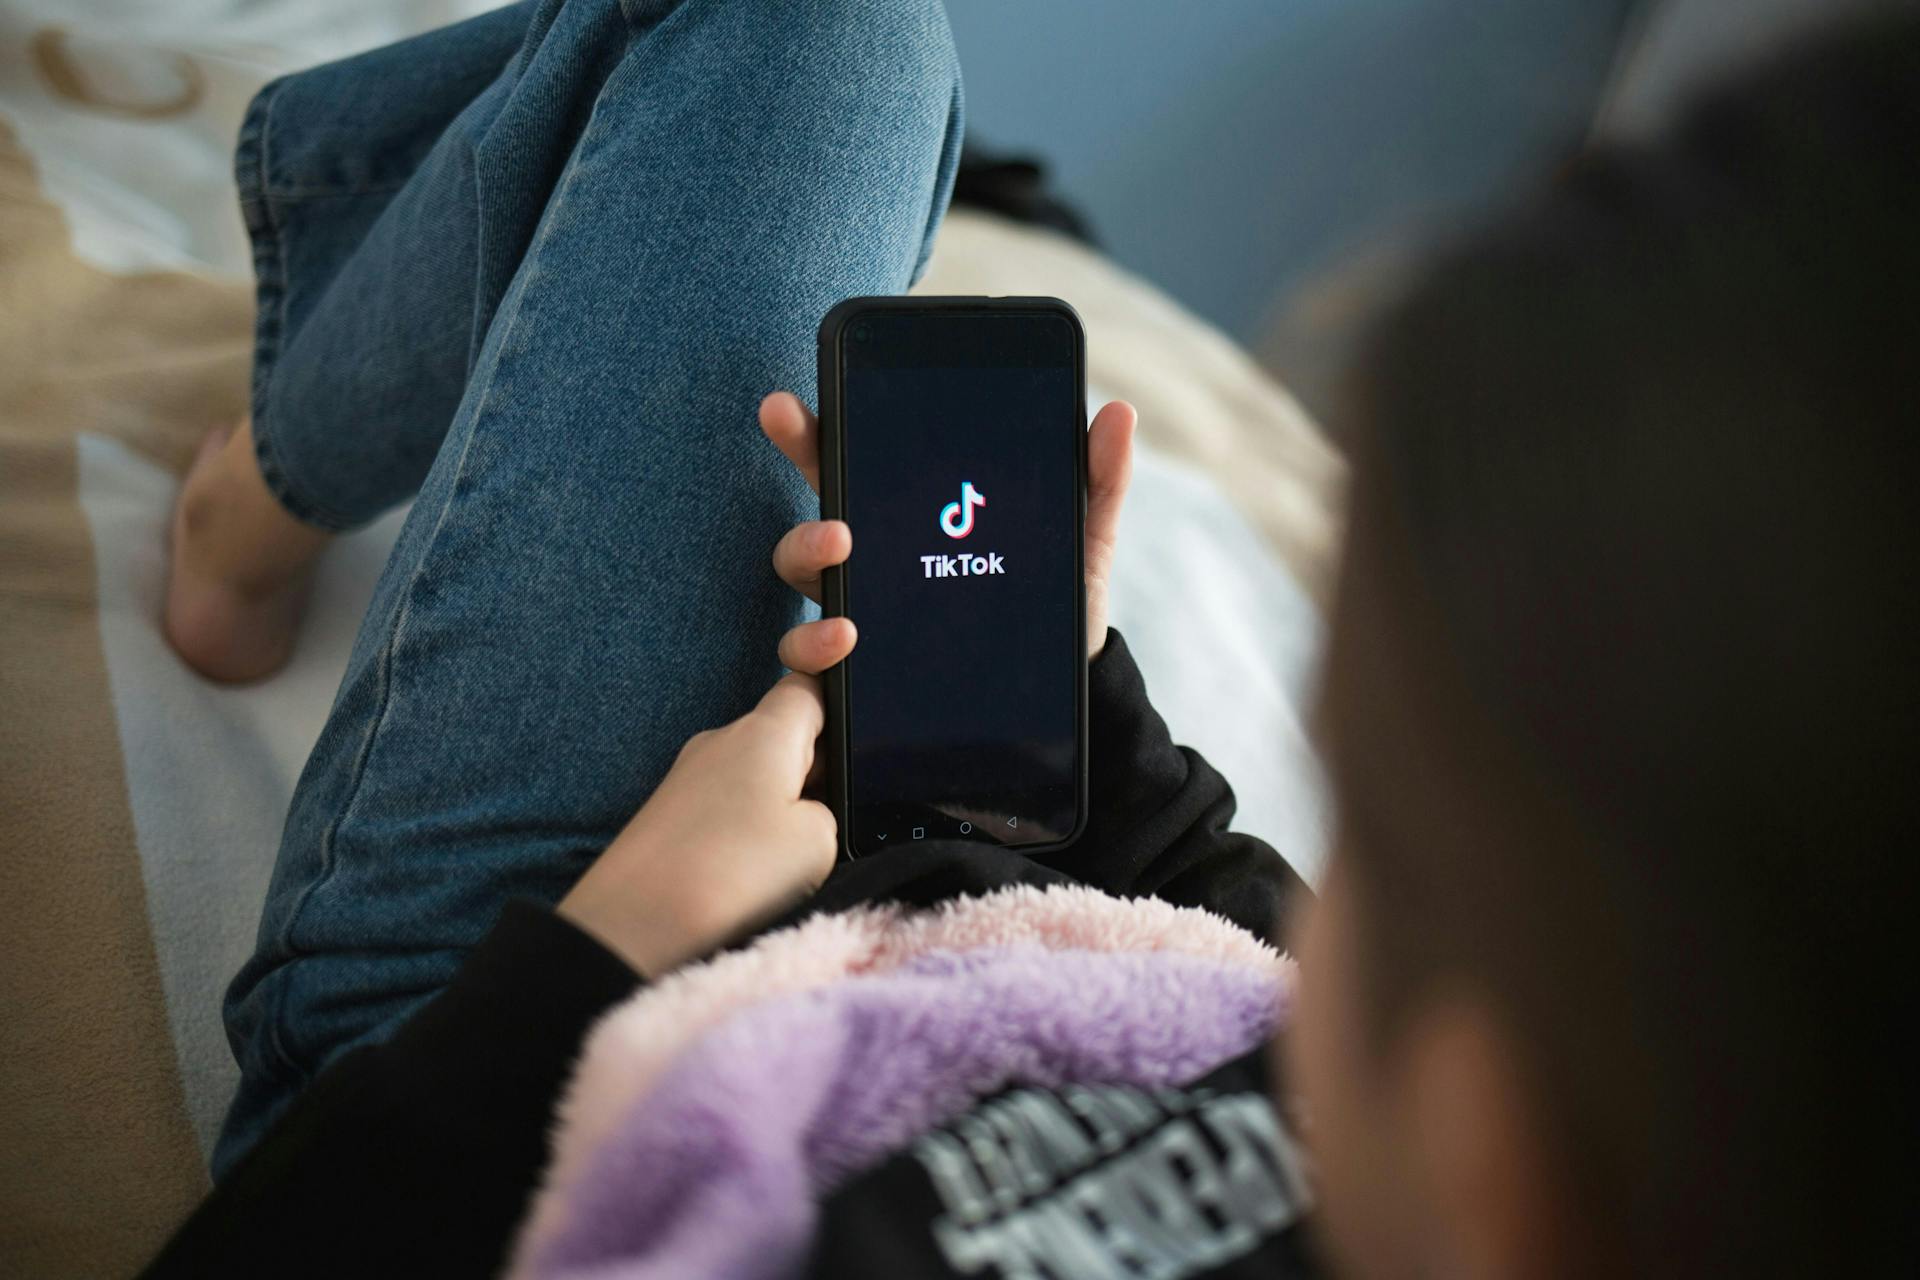 Image of a woman relaxing on a sofa, holding a smartphone displaying the TIokTok logo.